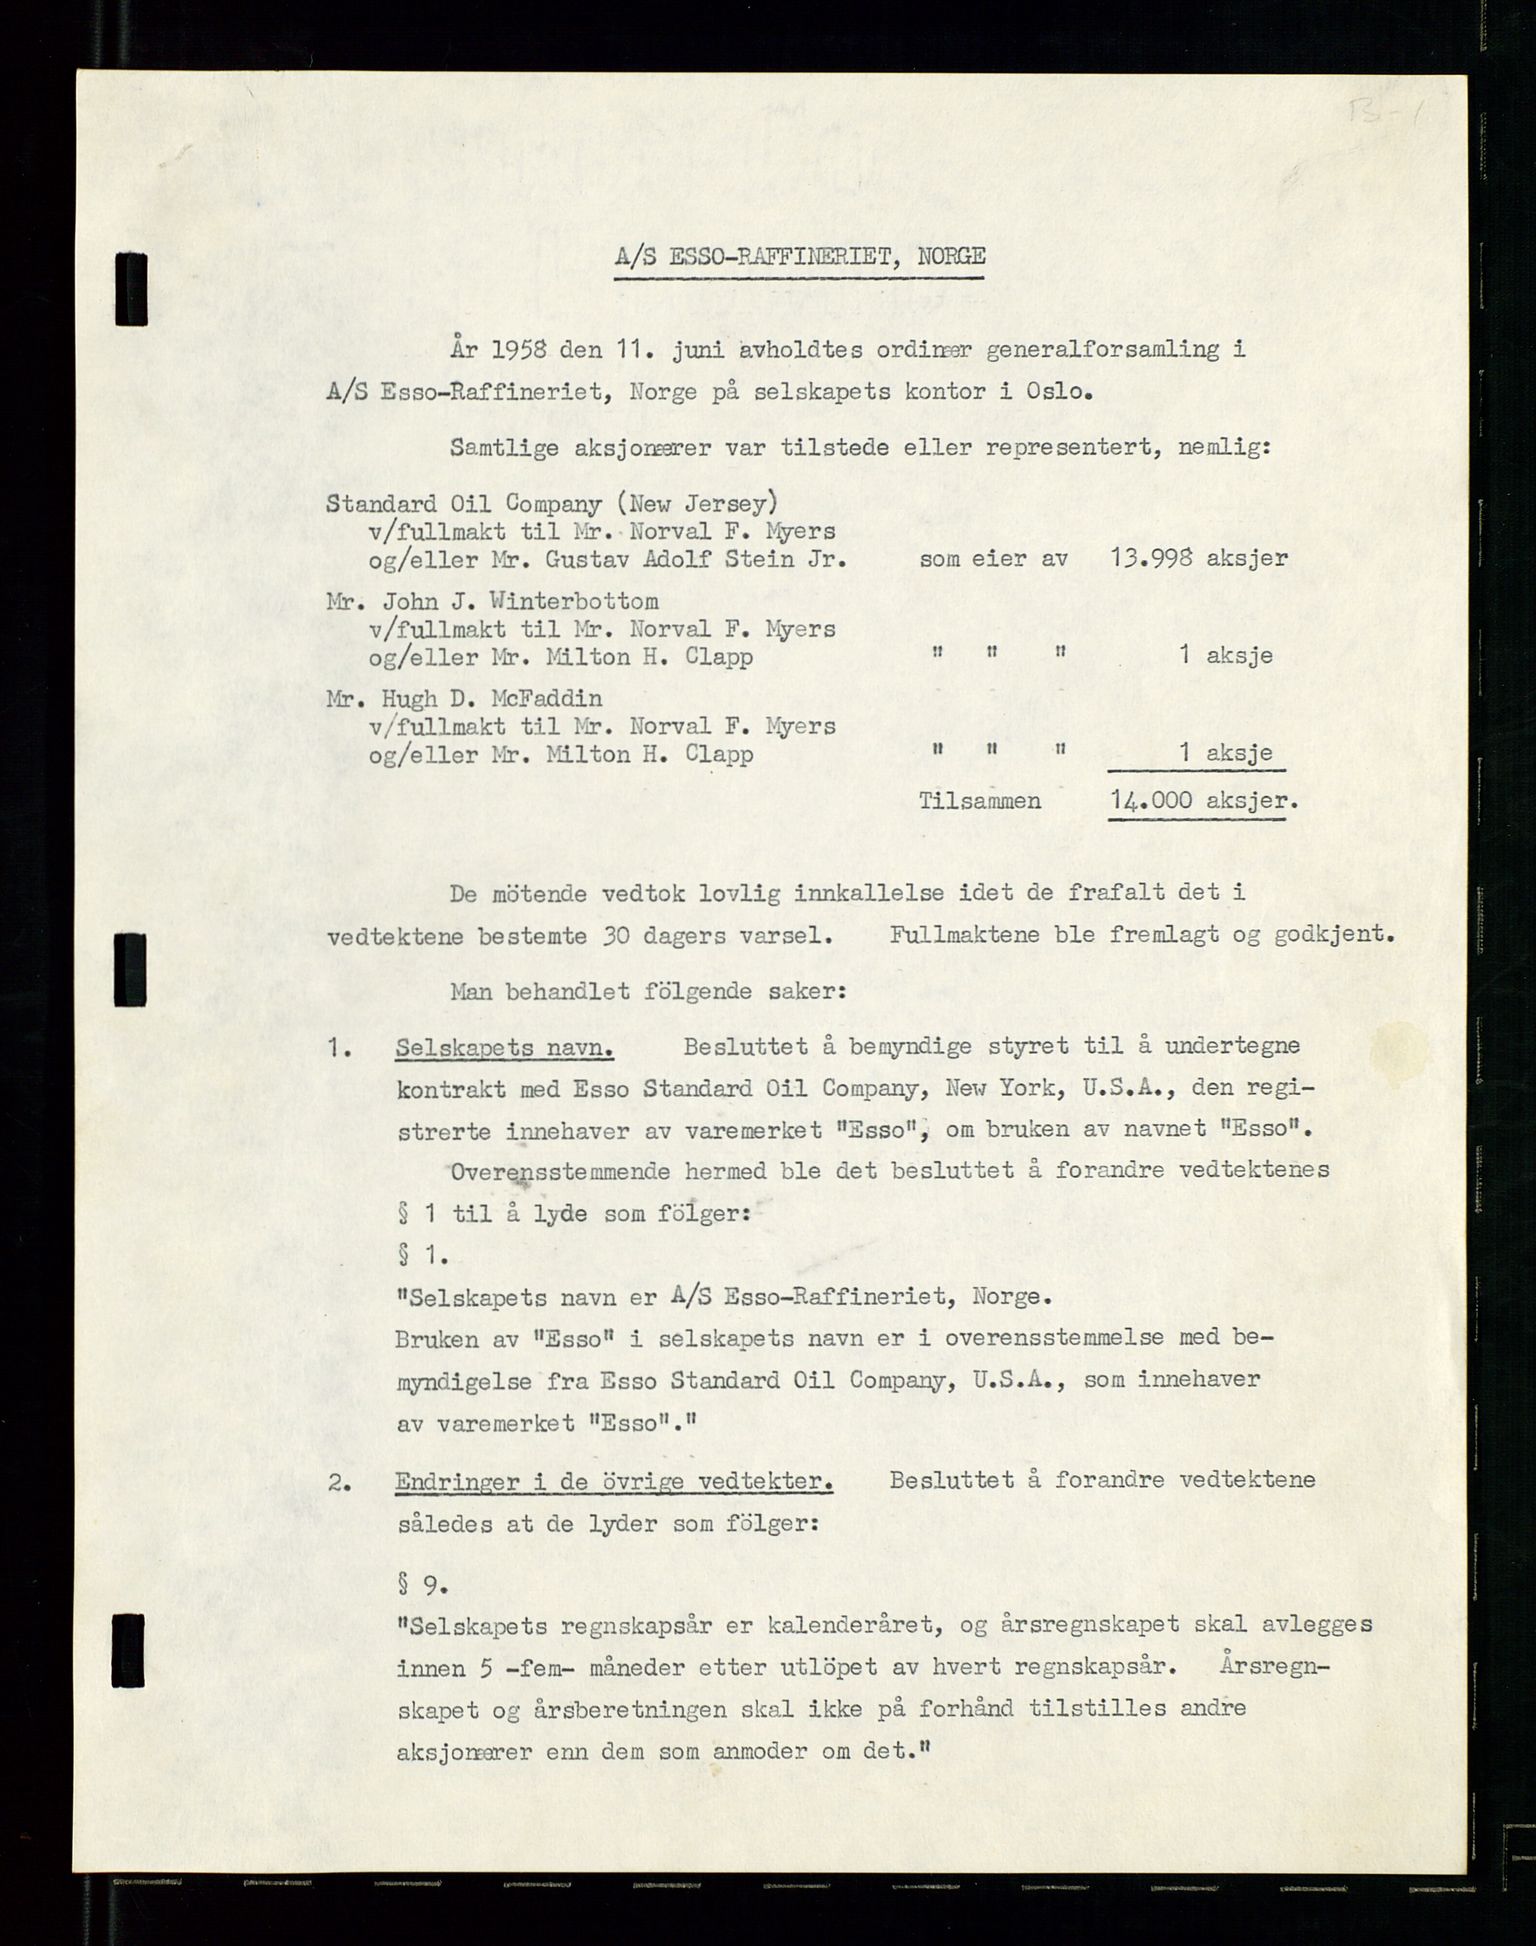 PA 1537 - A/S Essoraffineriet Norge, SAST/A-101957/A/Aa/L0001/0002: Styremøter / Shareholder meetings, board meetings, by laws (vedtekter), 1957-1960, s. 62